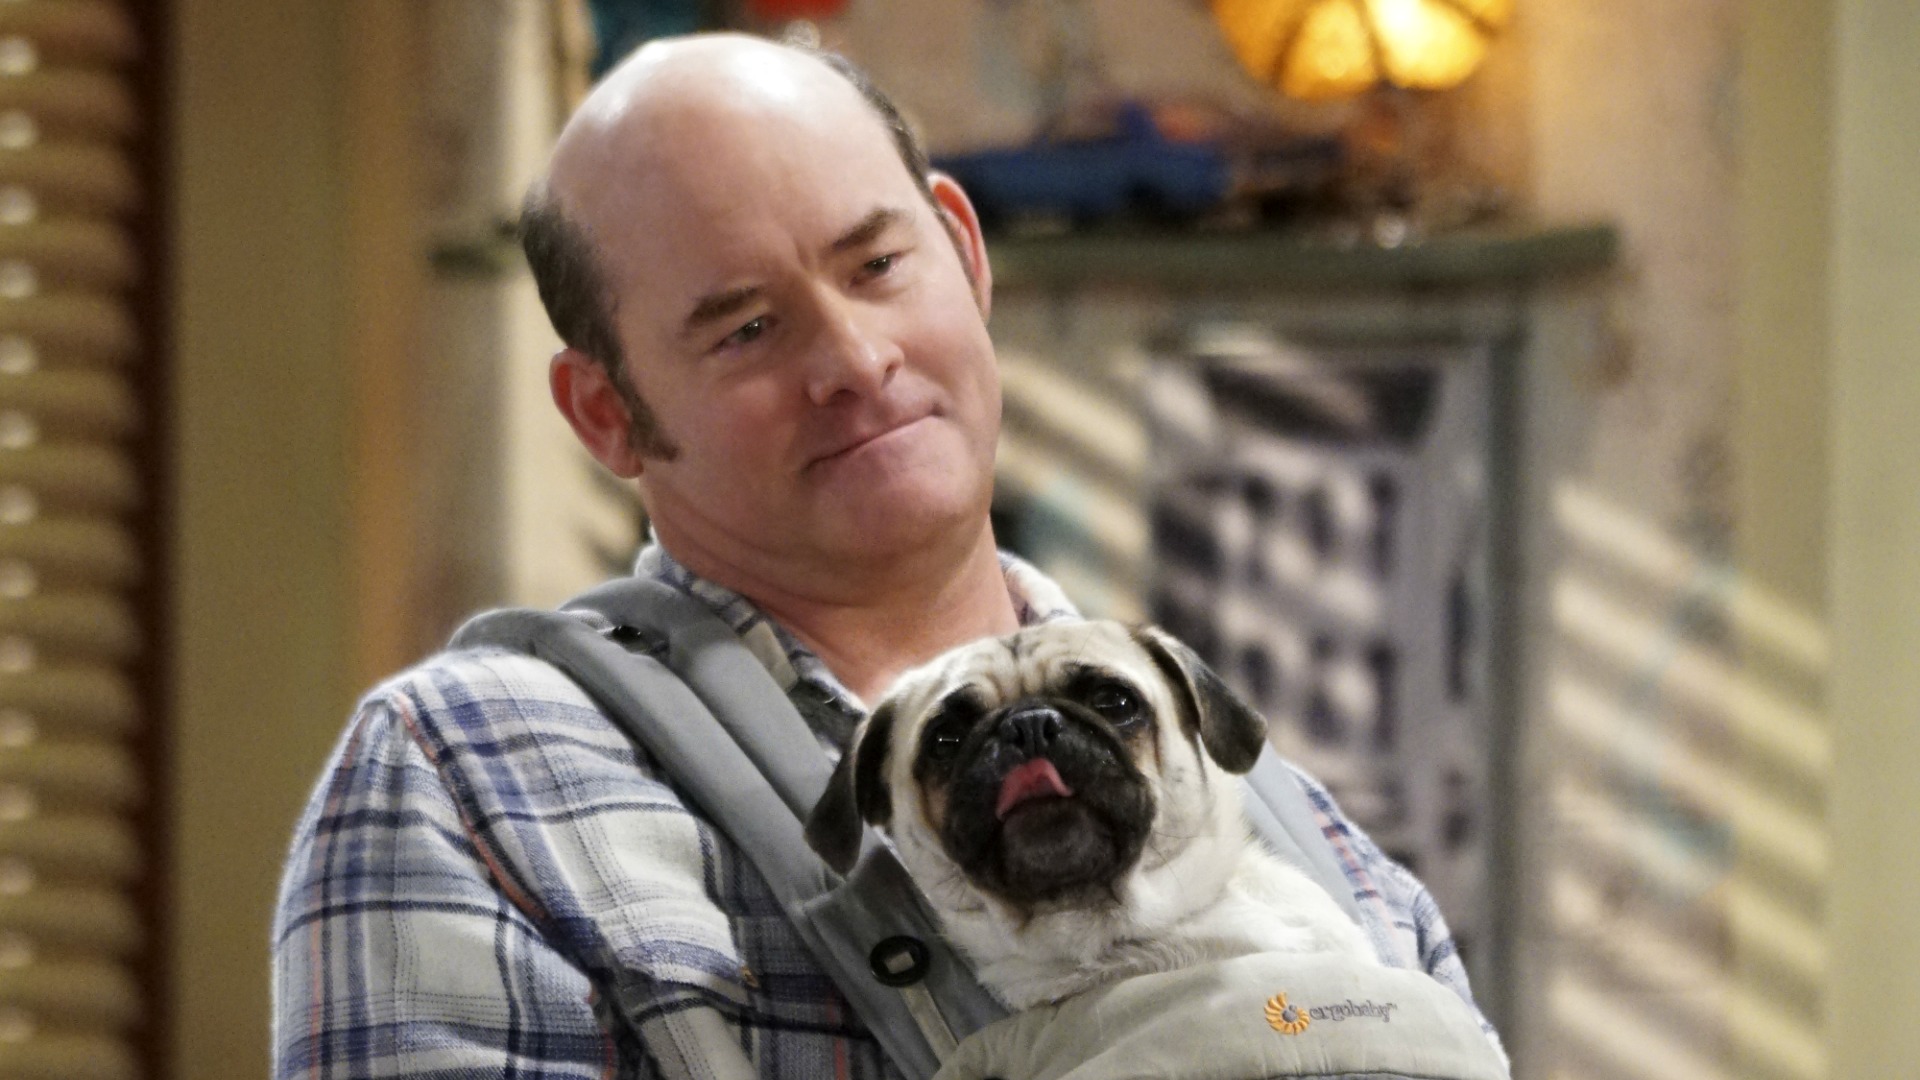 David Koechner from Superior Donuts